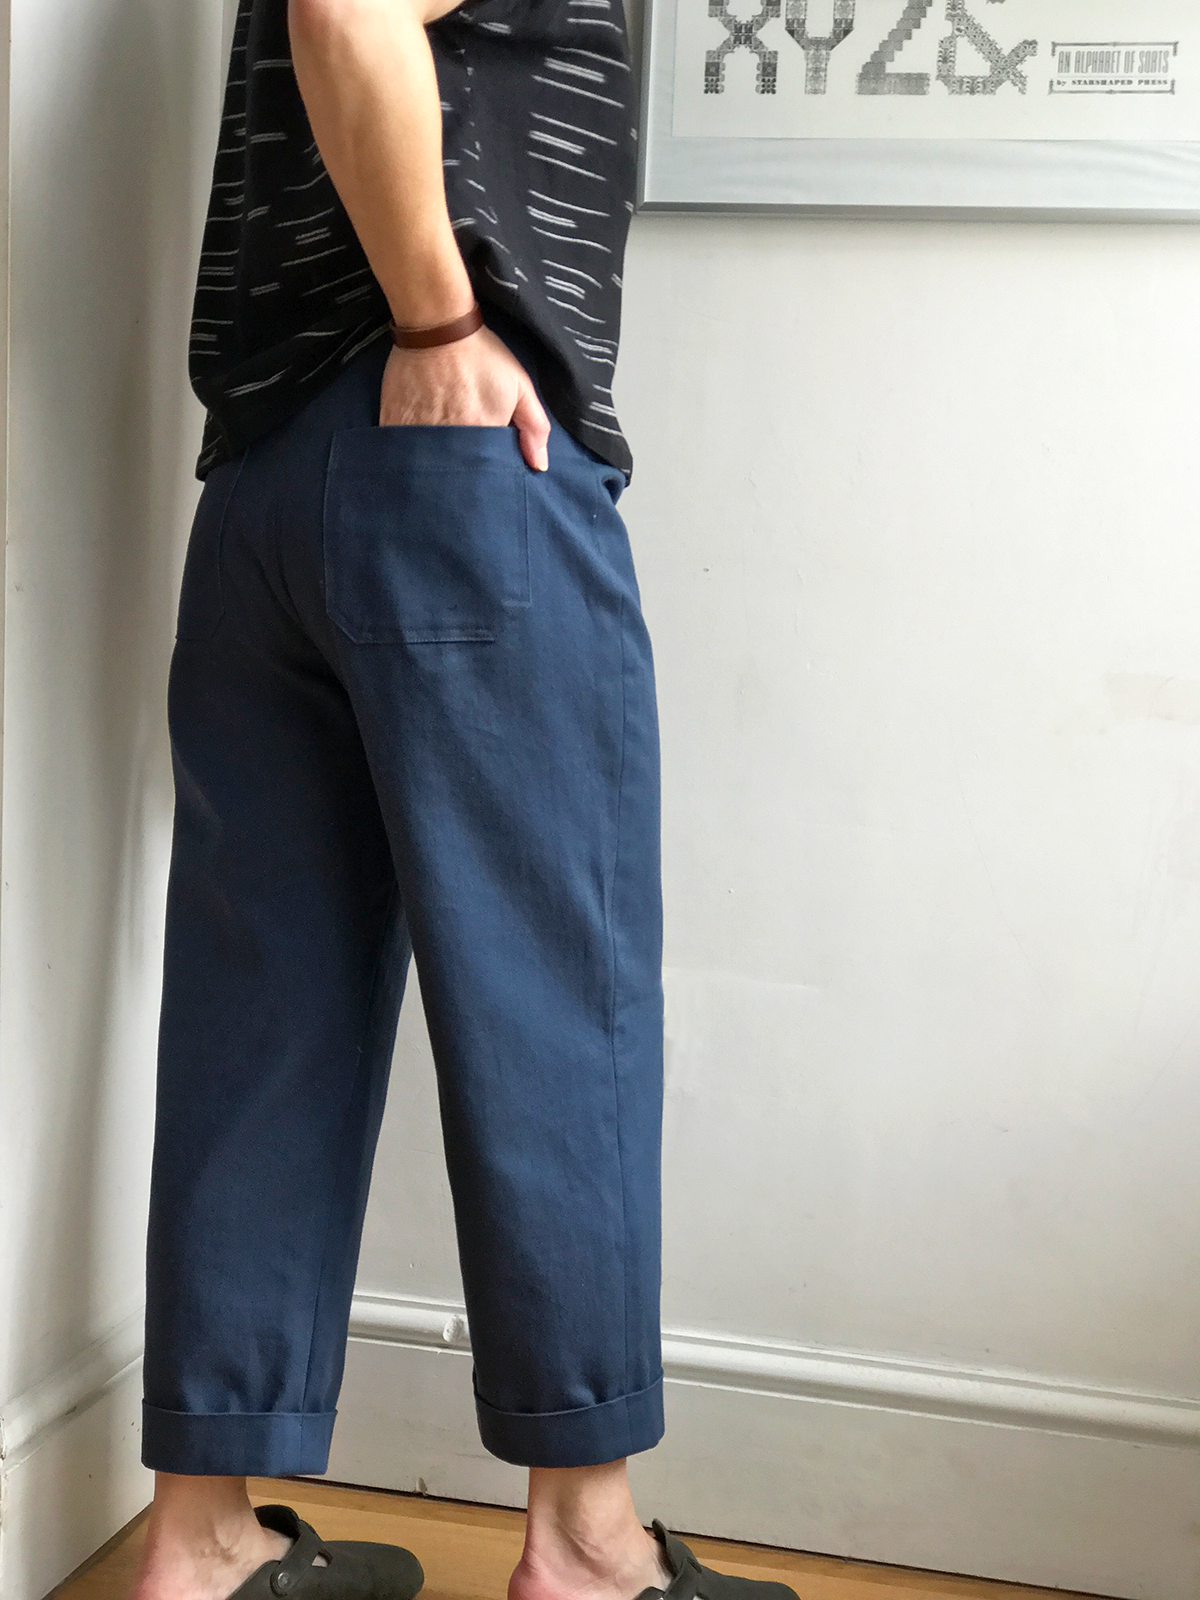 Eve Trousers by Merchant & Mills made in Ventana Twill – FABERWOOD